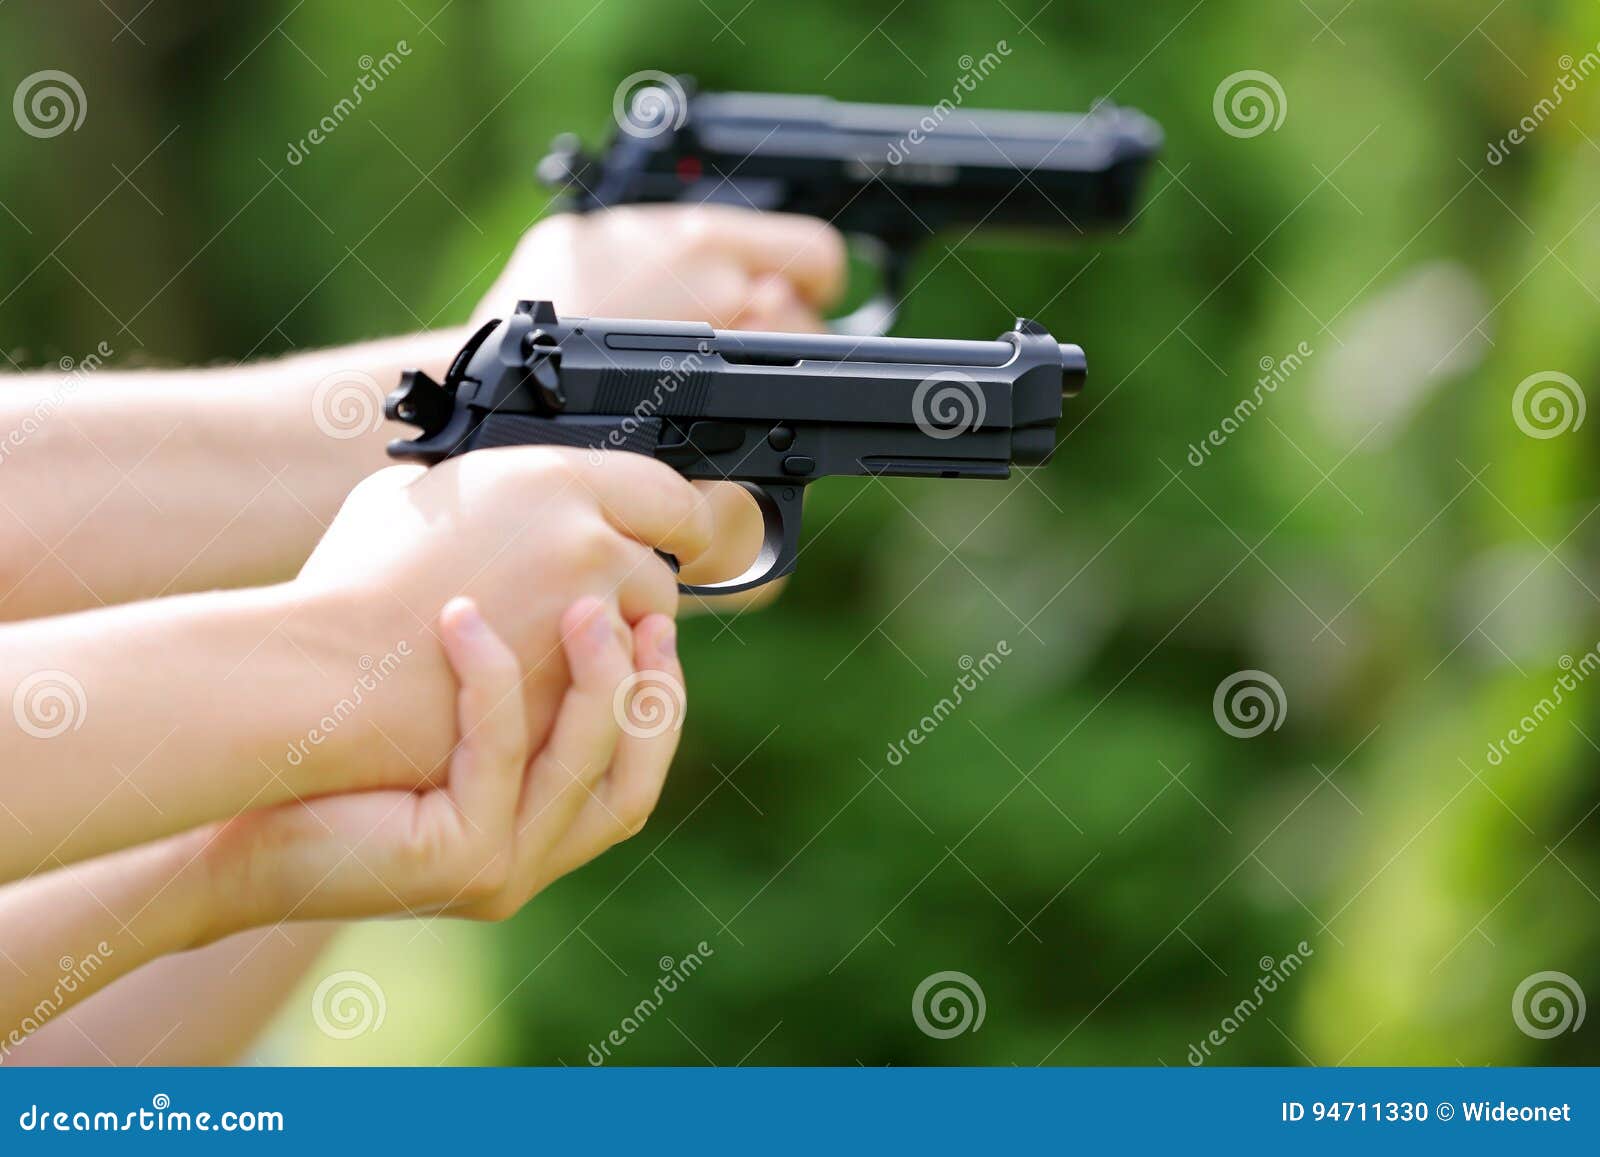 Young Boys Practice Shooting Guns on Outdoor Stock Photo - Image